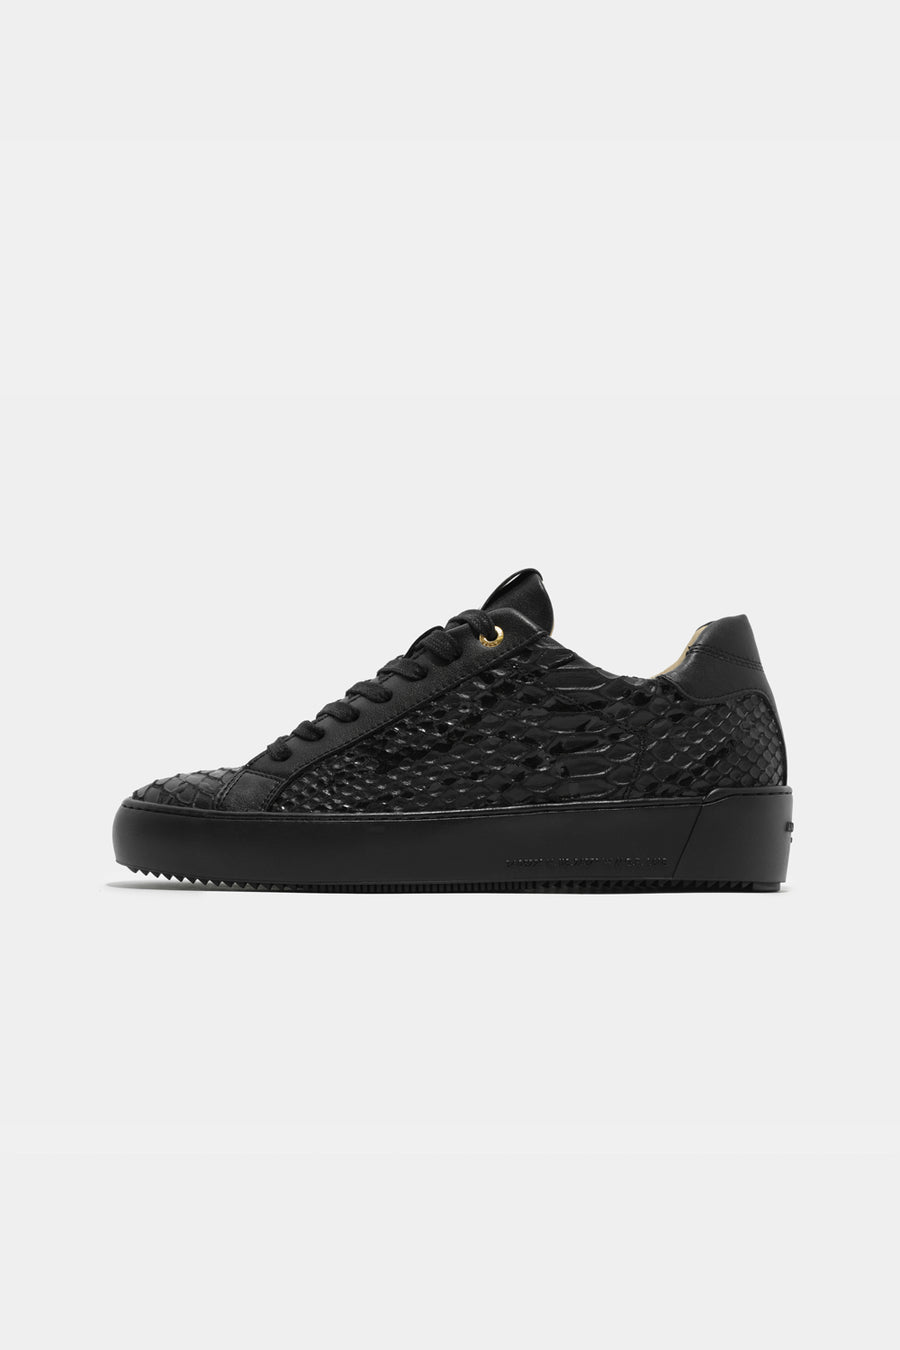 Buy the Android Homme Zuma Black Gloss Viper Sneaker at Intro. Spend £50 for free UK delivery. Official stockists. We ship worldwide.